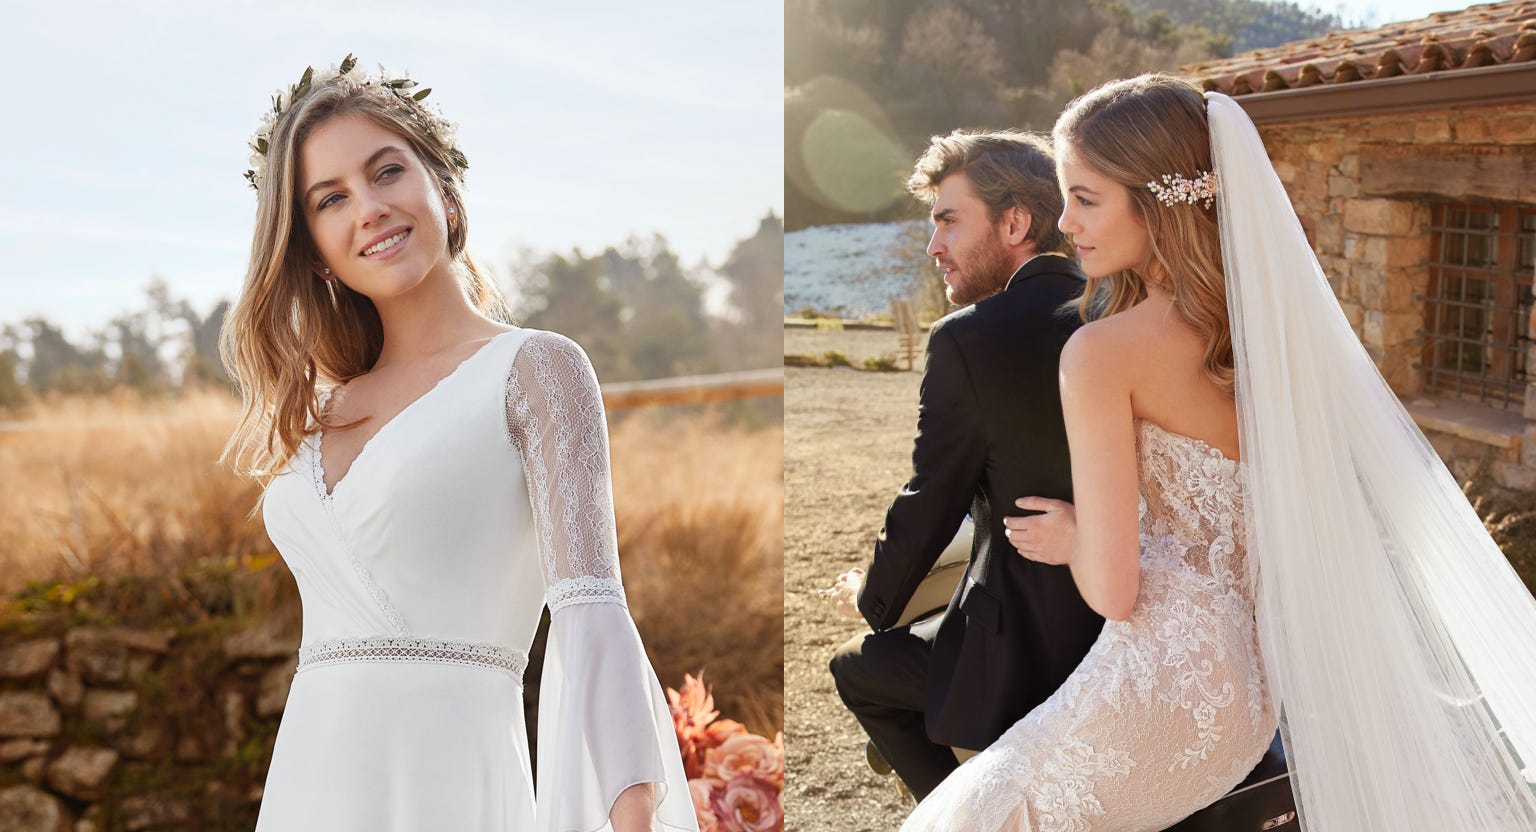 Wedding dresses with a youthful twist